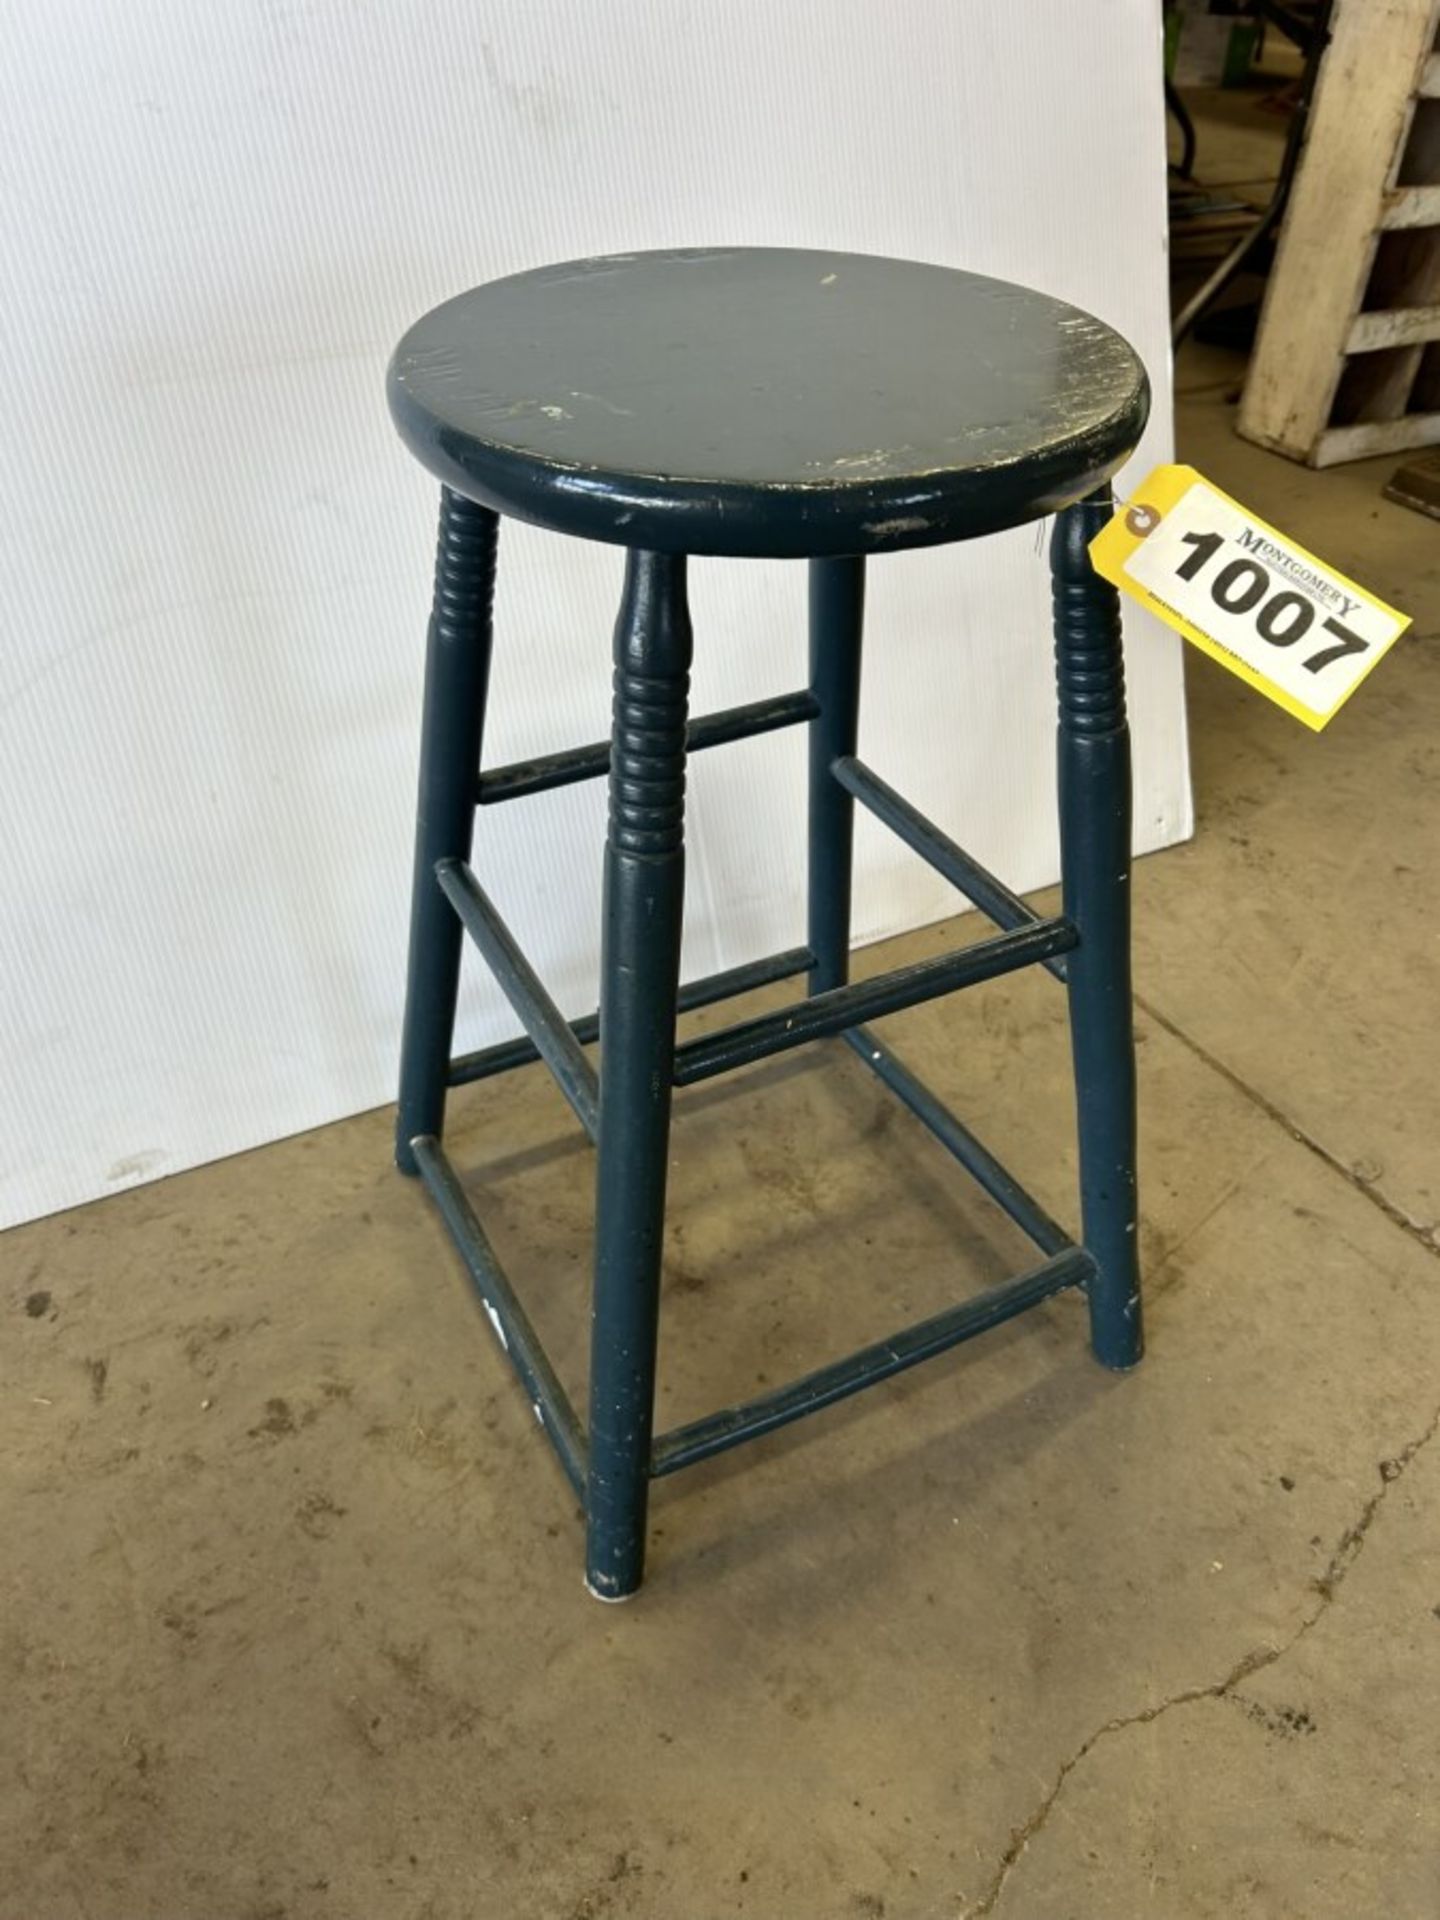 ANTIQUE WOODEN KITCHEN STOOL - Image 2 of 5